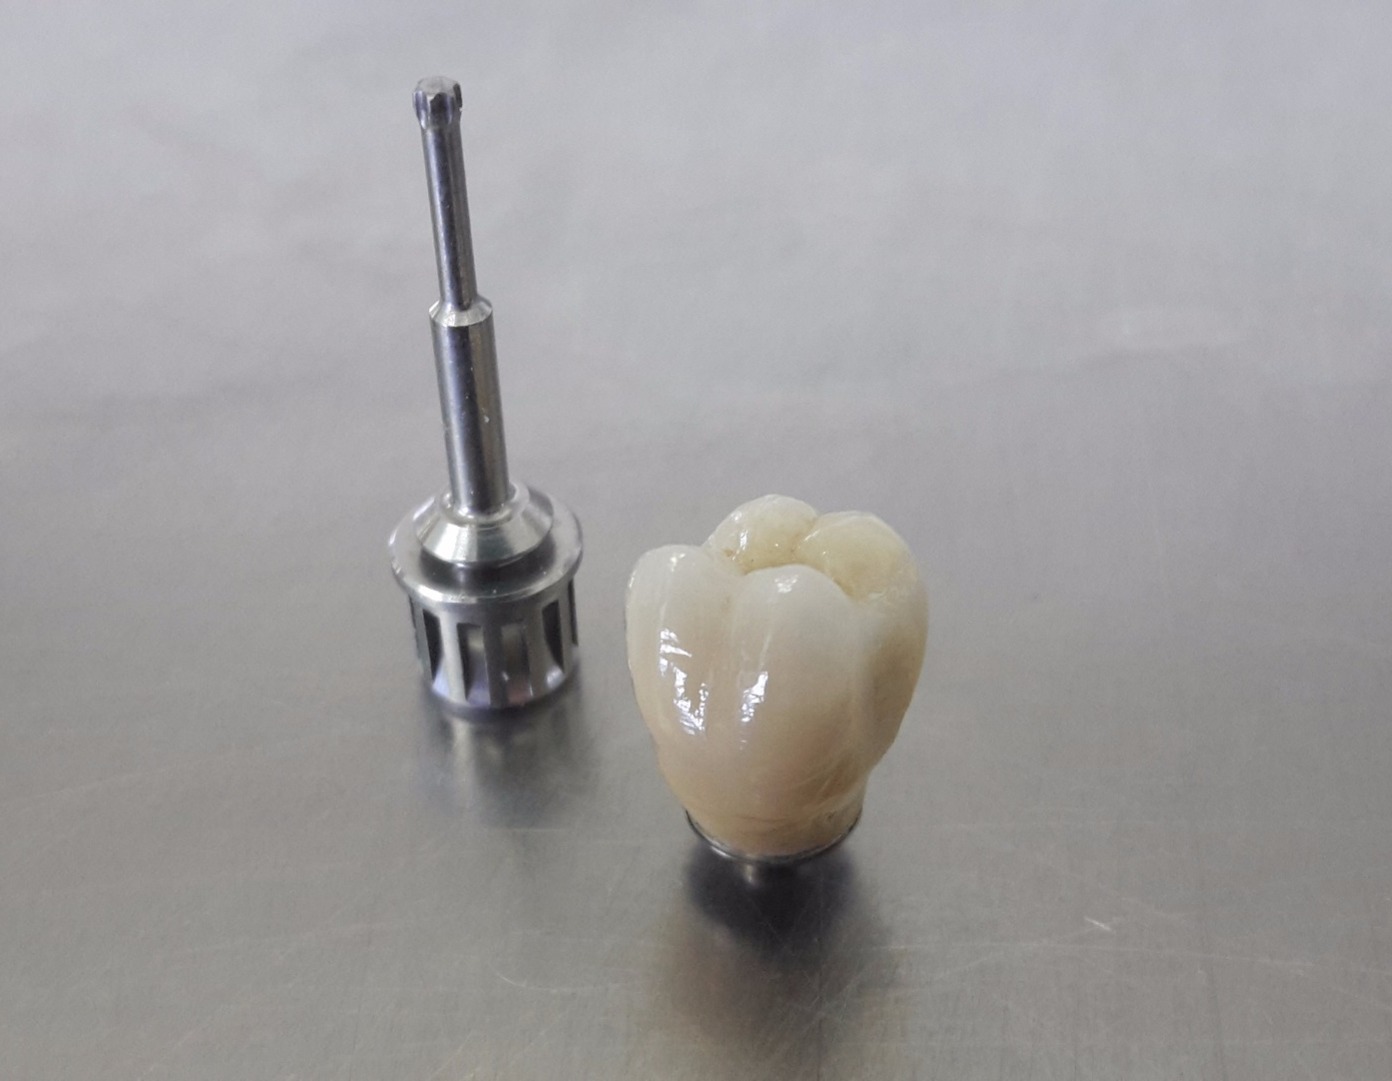 Screw retained crown